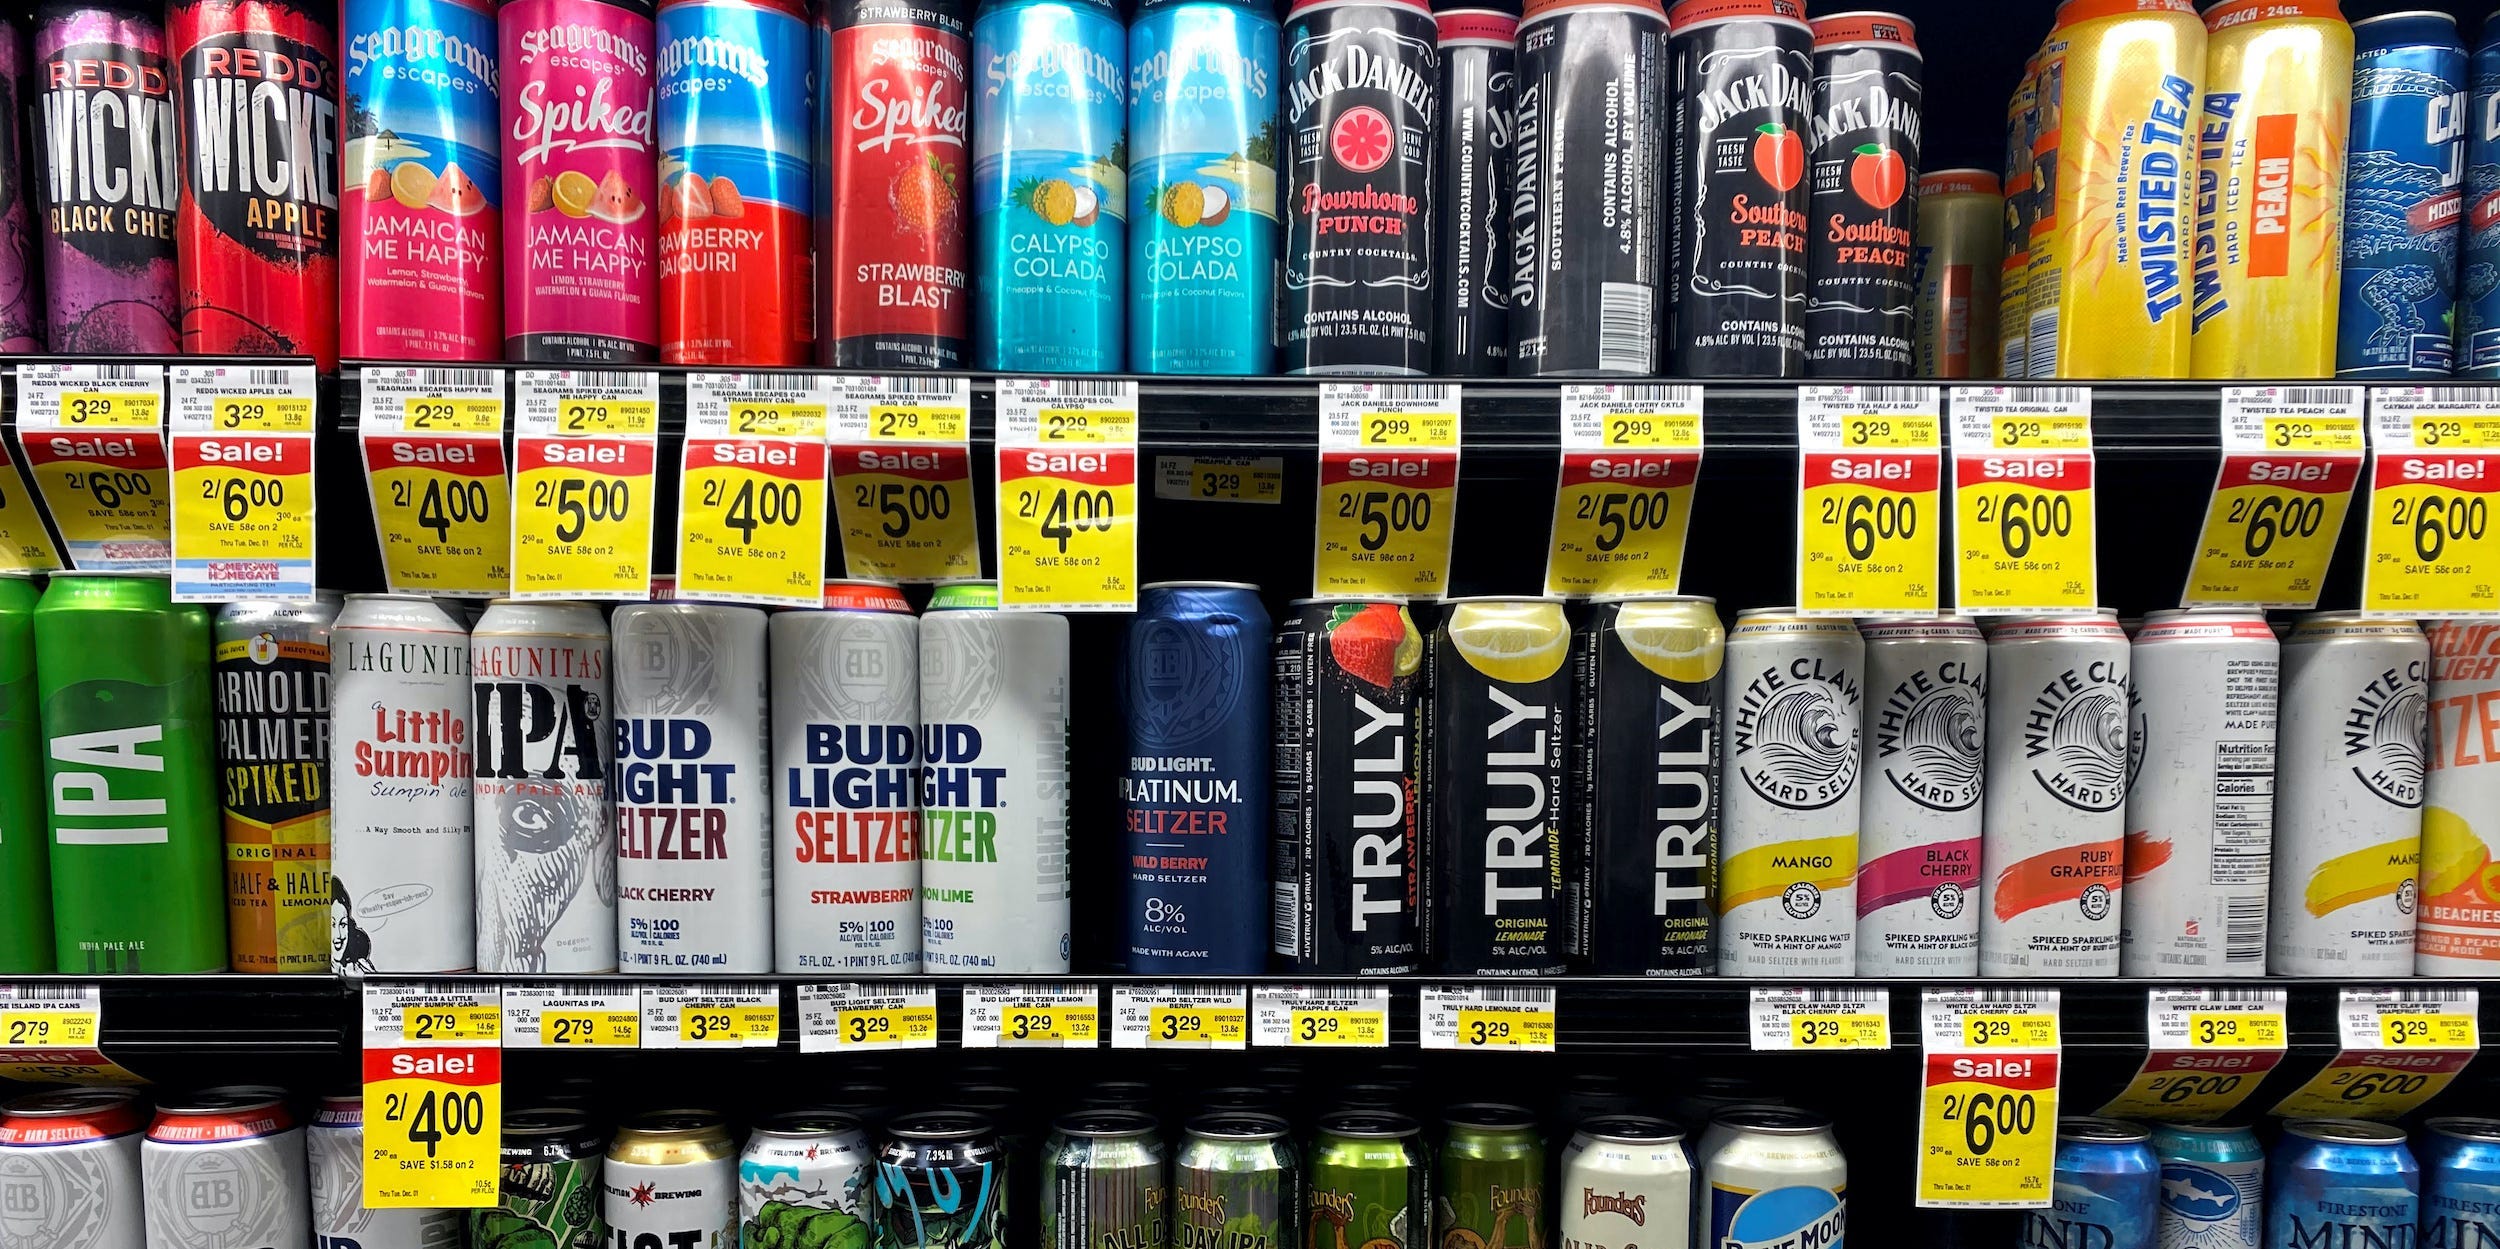 Rows of cans of hard seltzer and beer on shelf in store